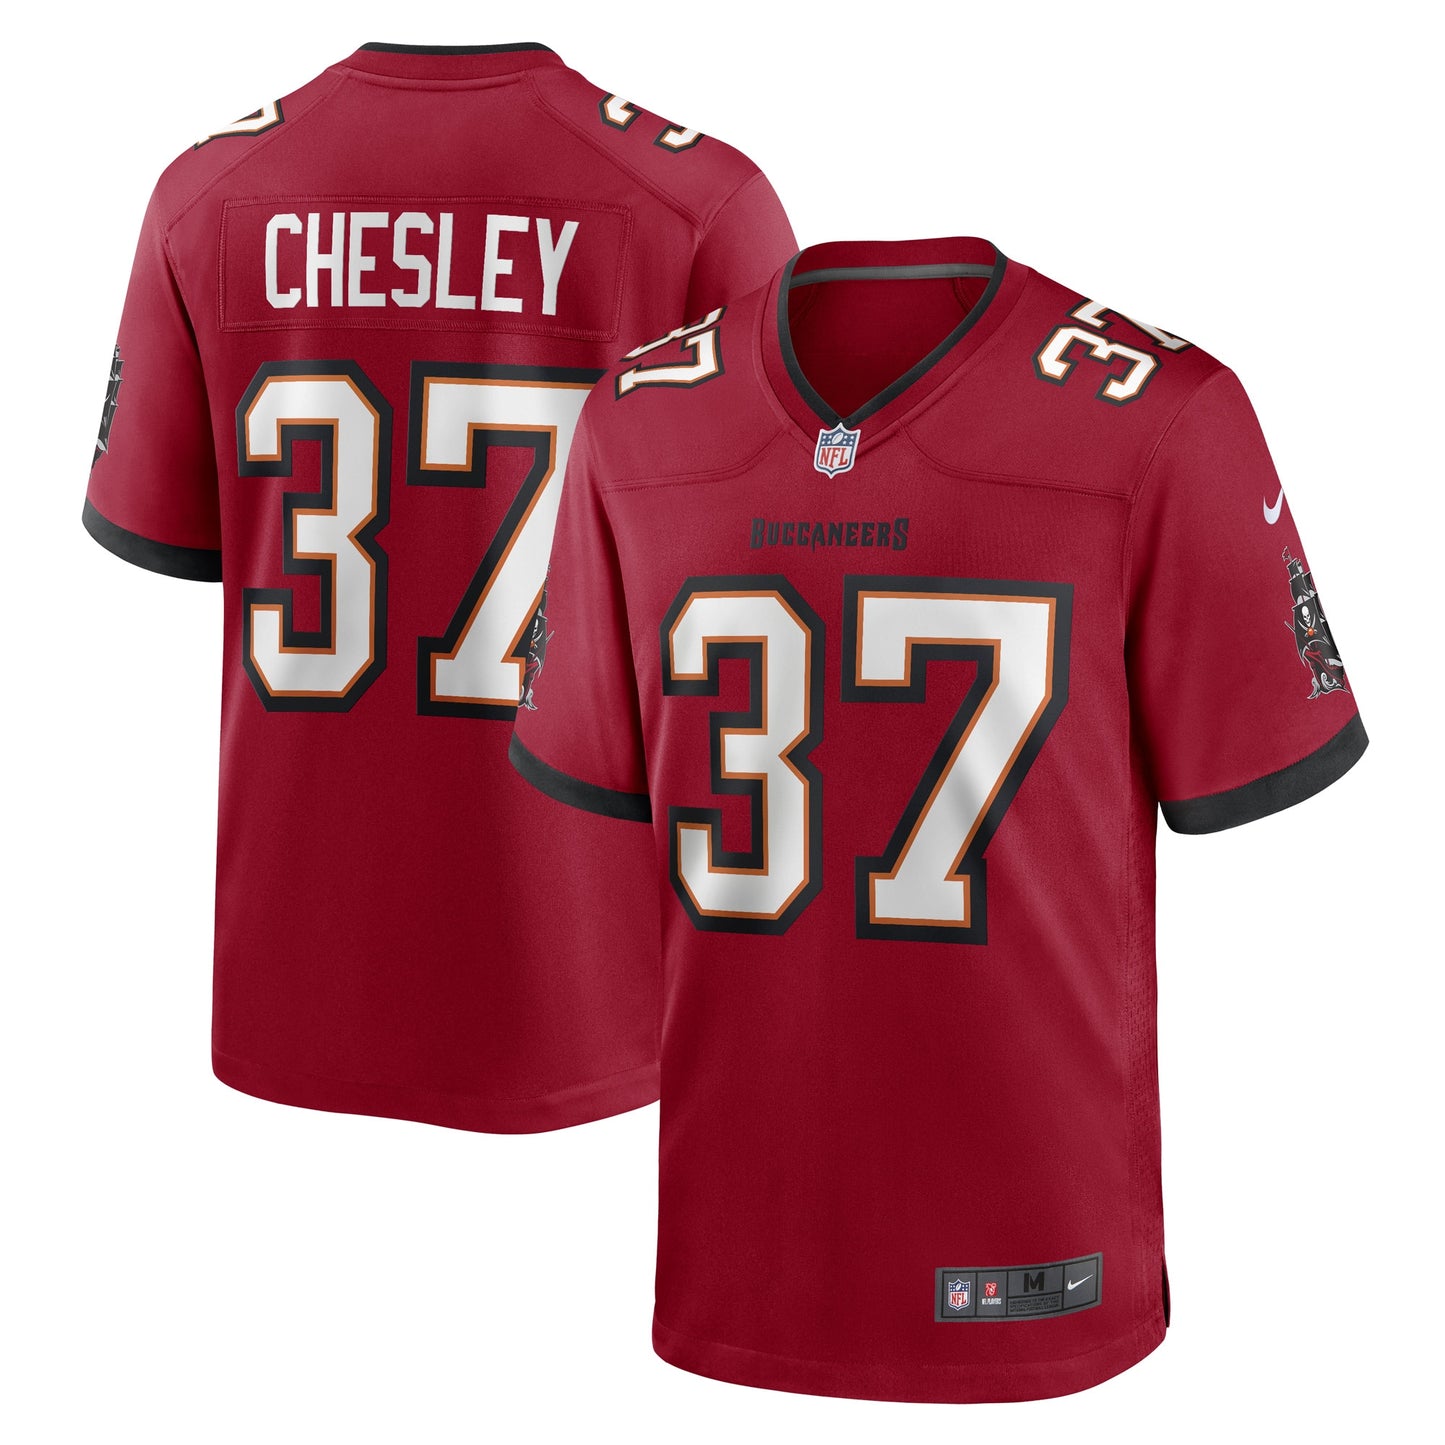 Anthony Chesley Tampa Bay Buccaneers Nike Game Player Jersey - Red